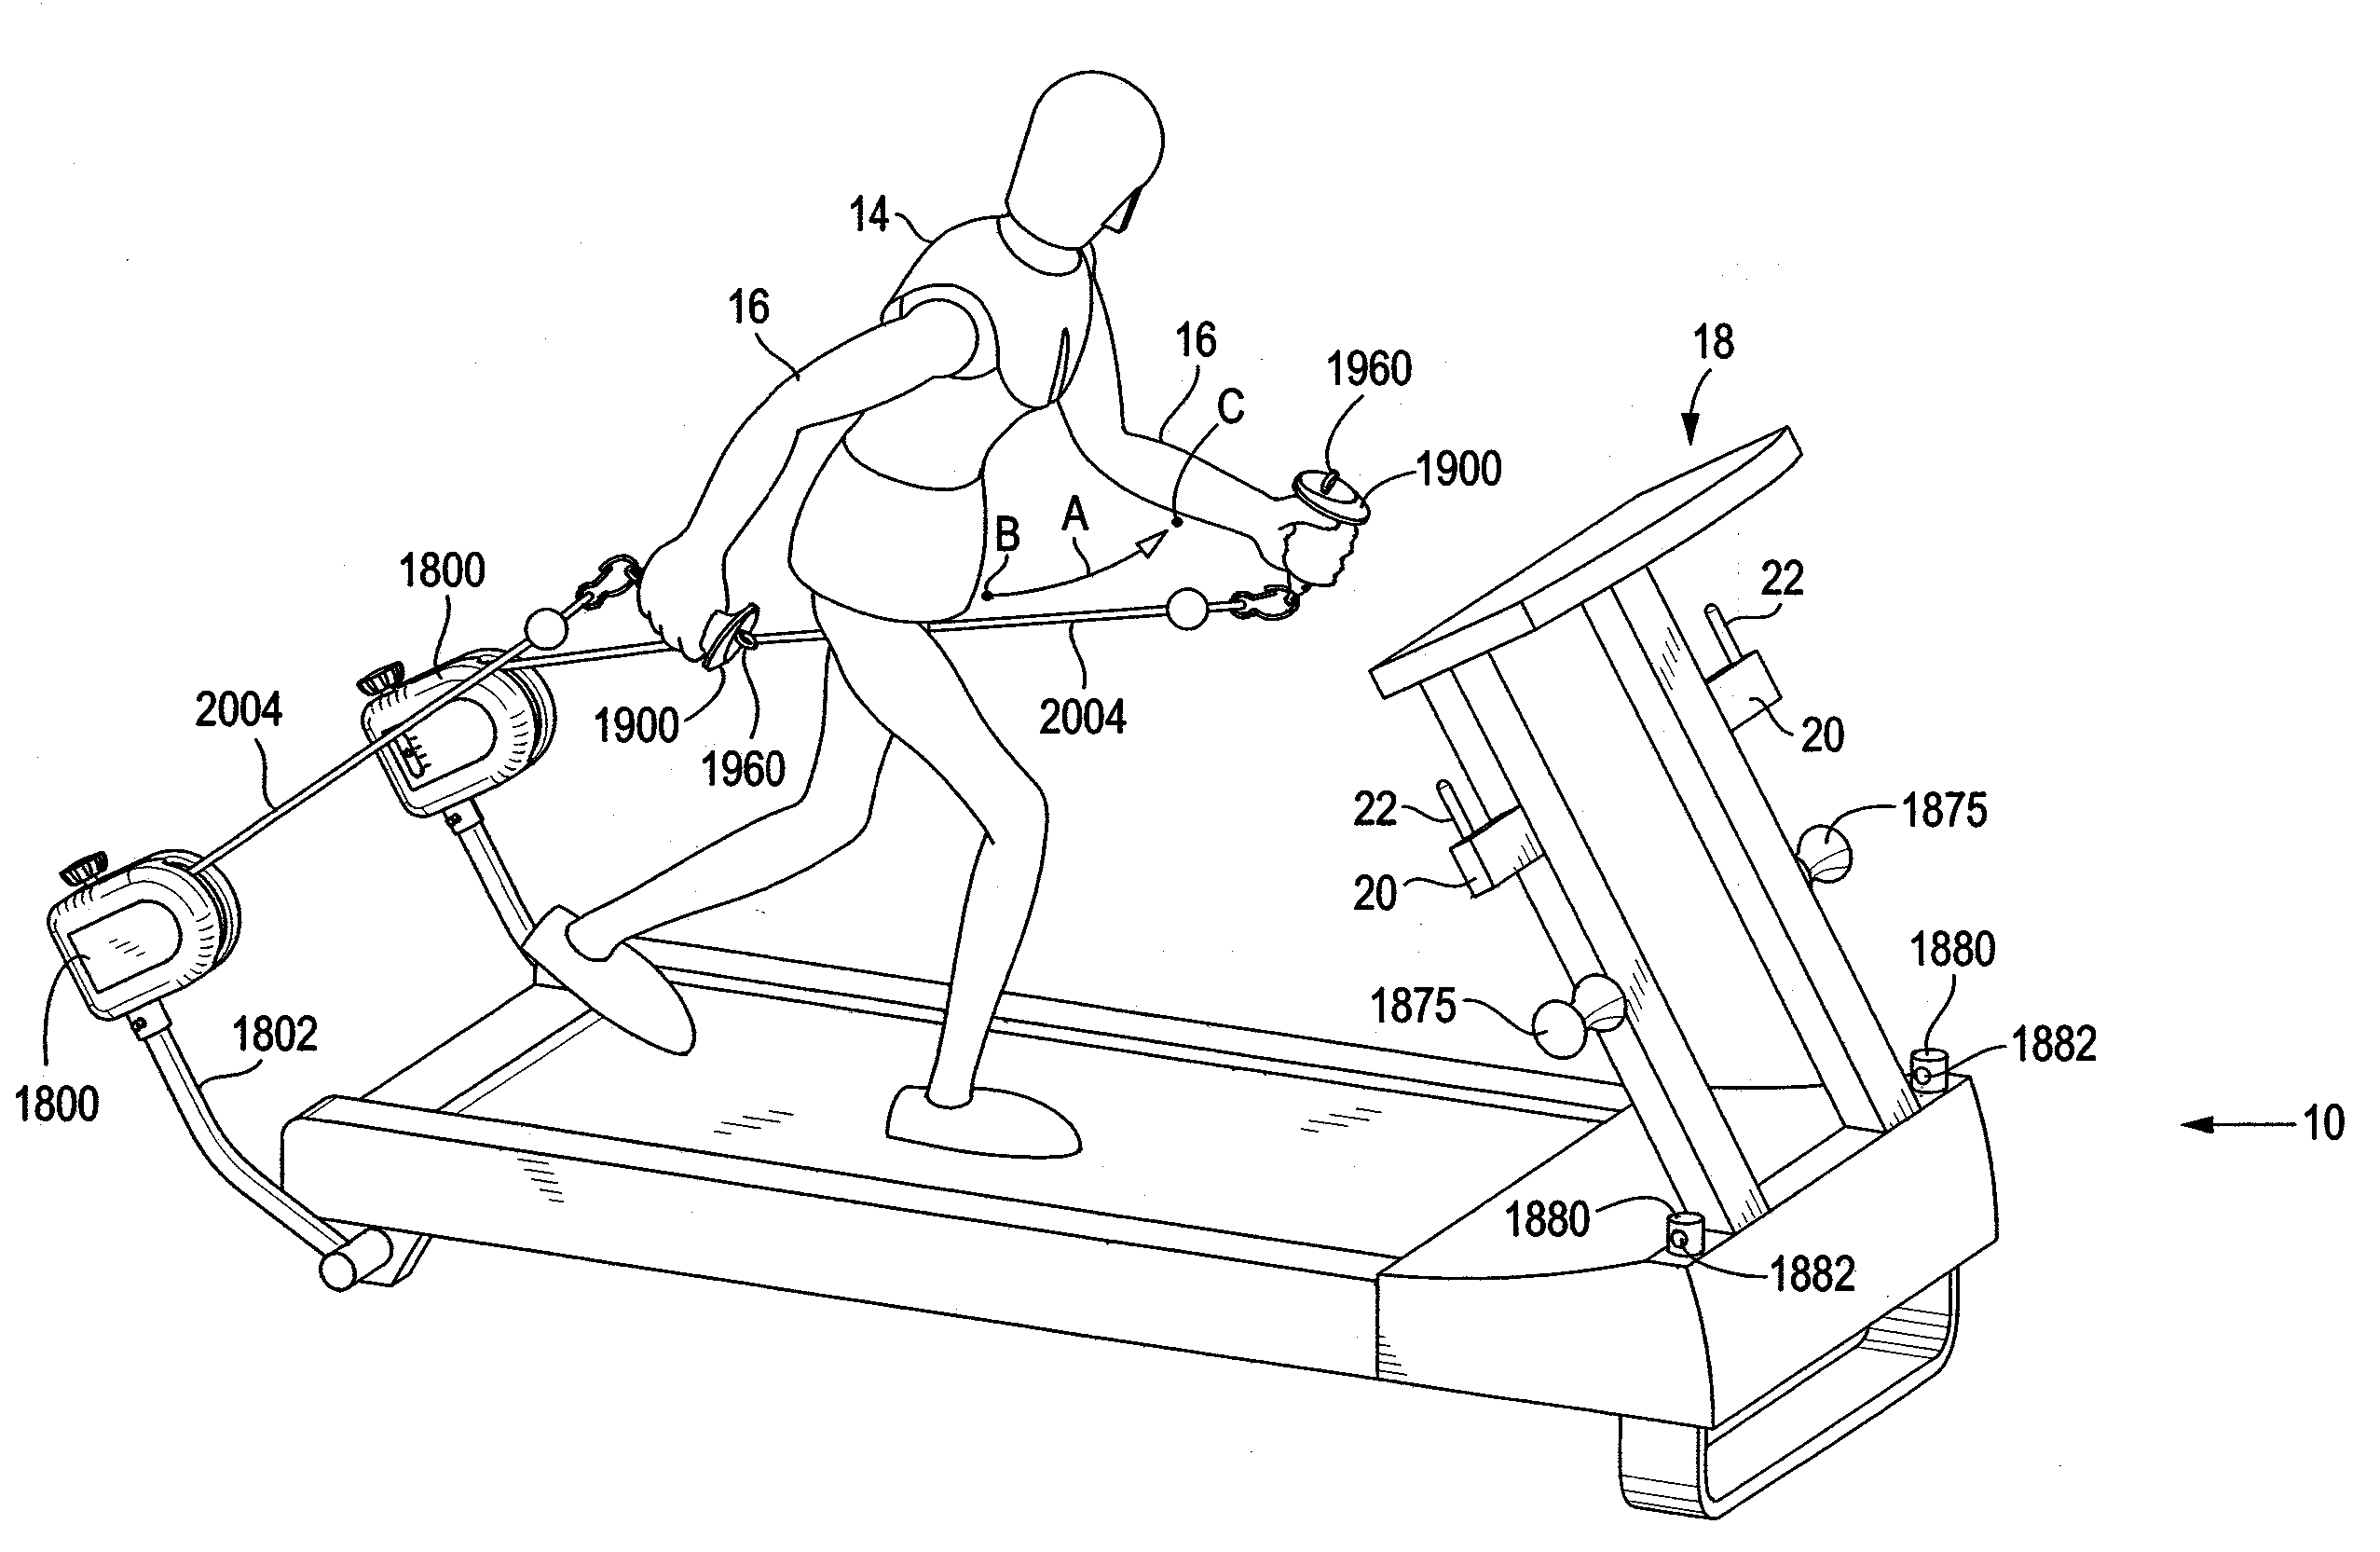 Exercise device for exercising upper body simultaneously with lower body exercise